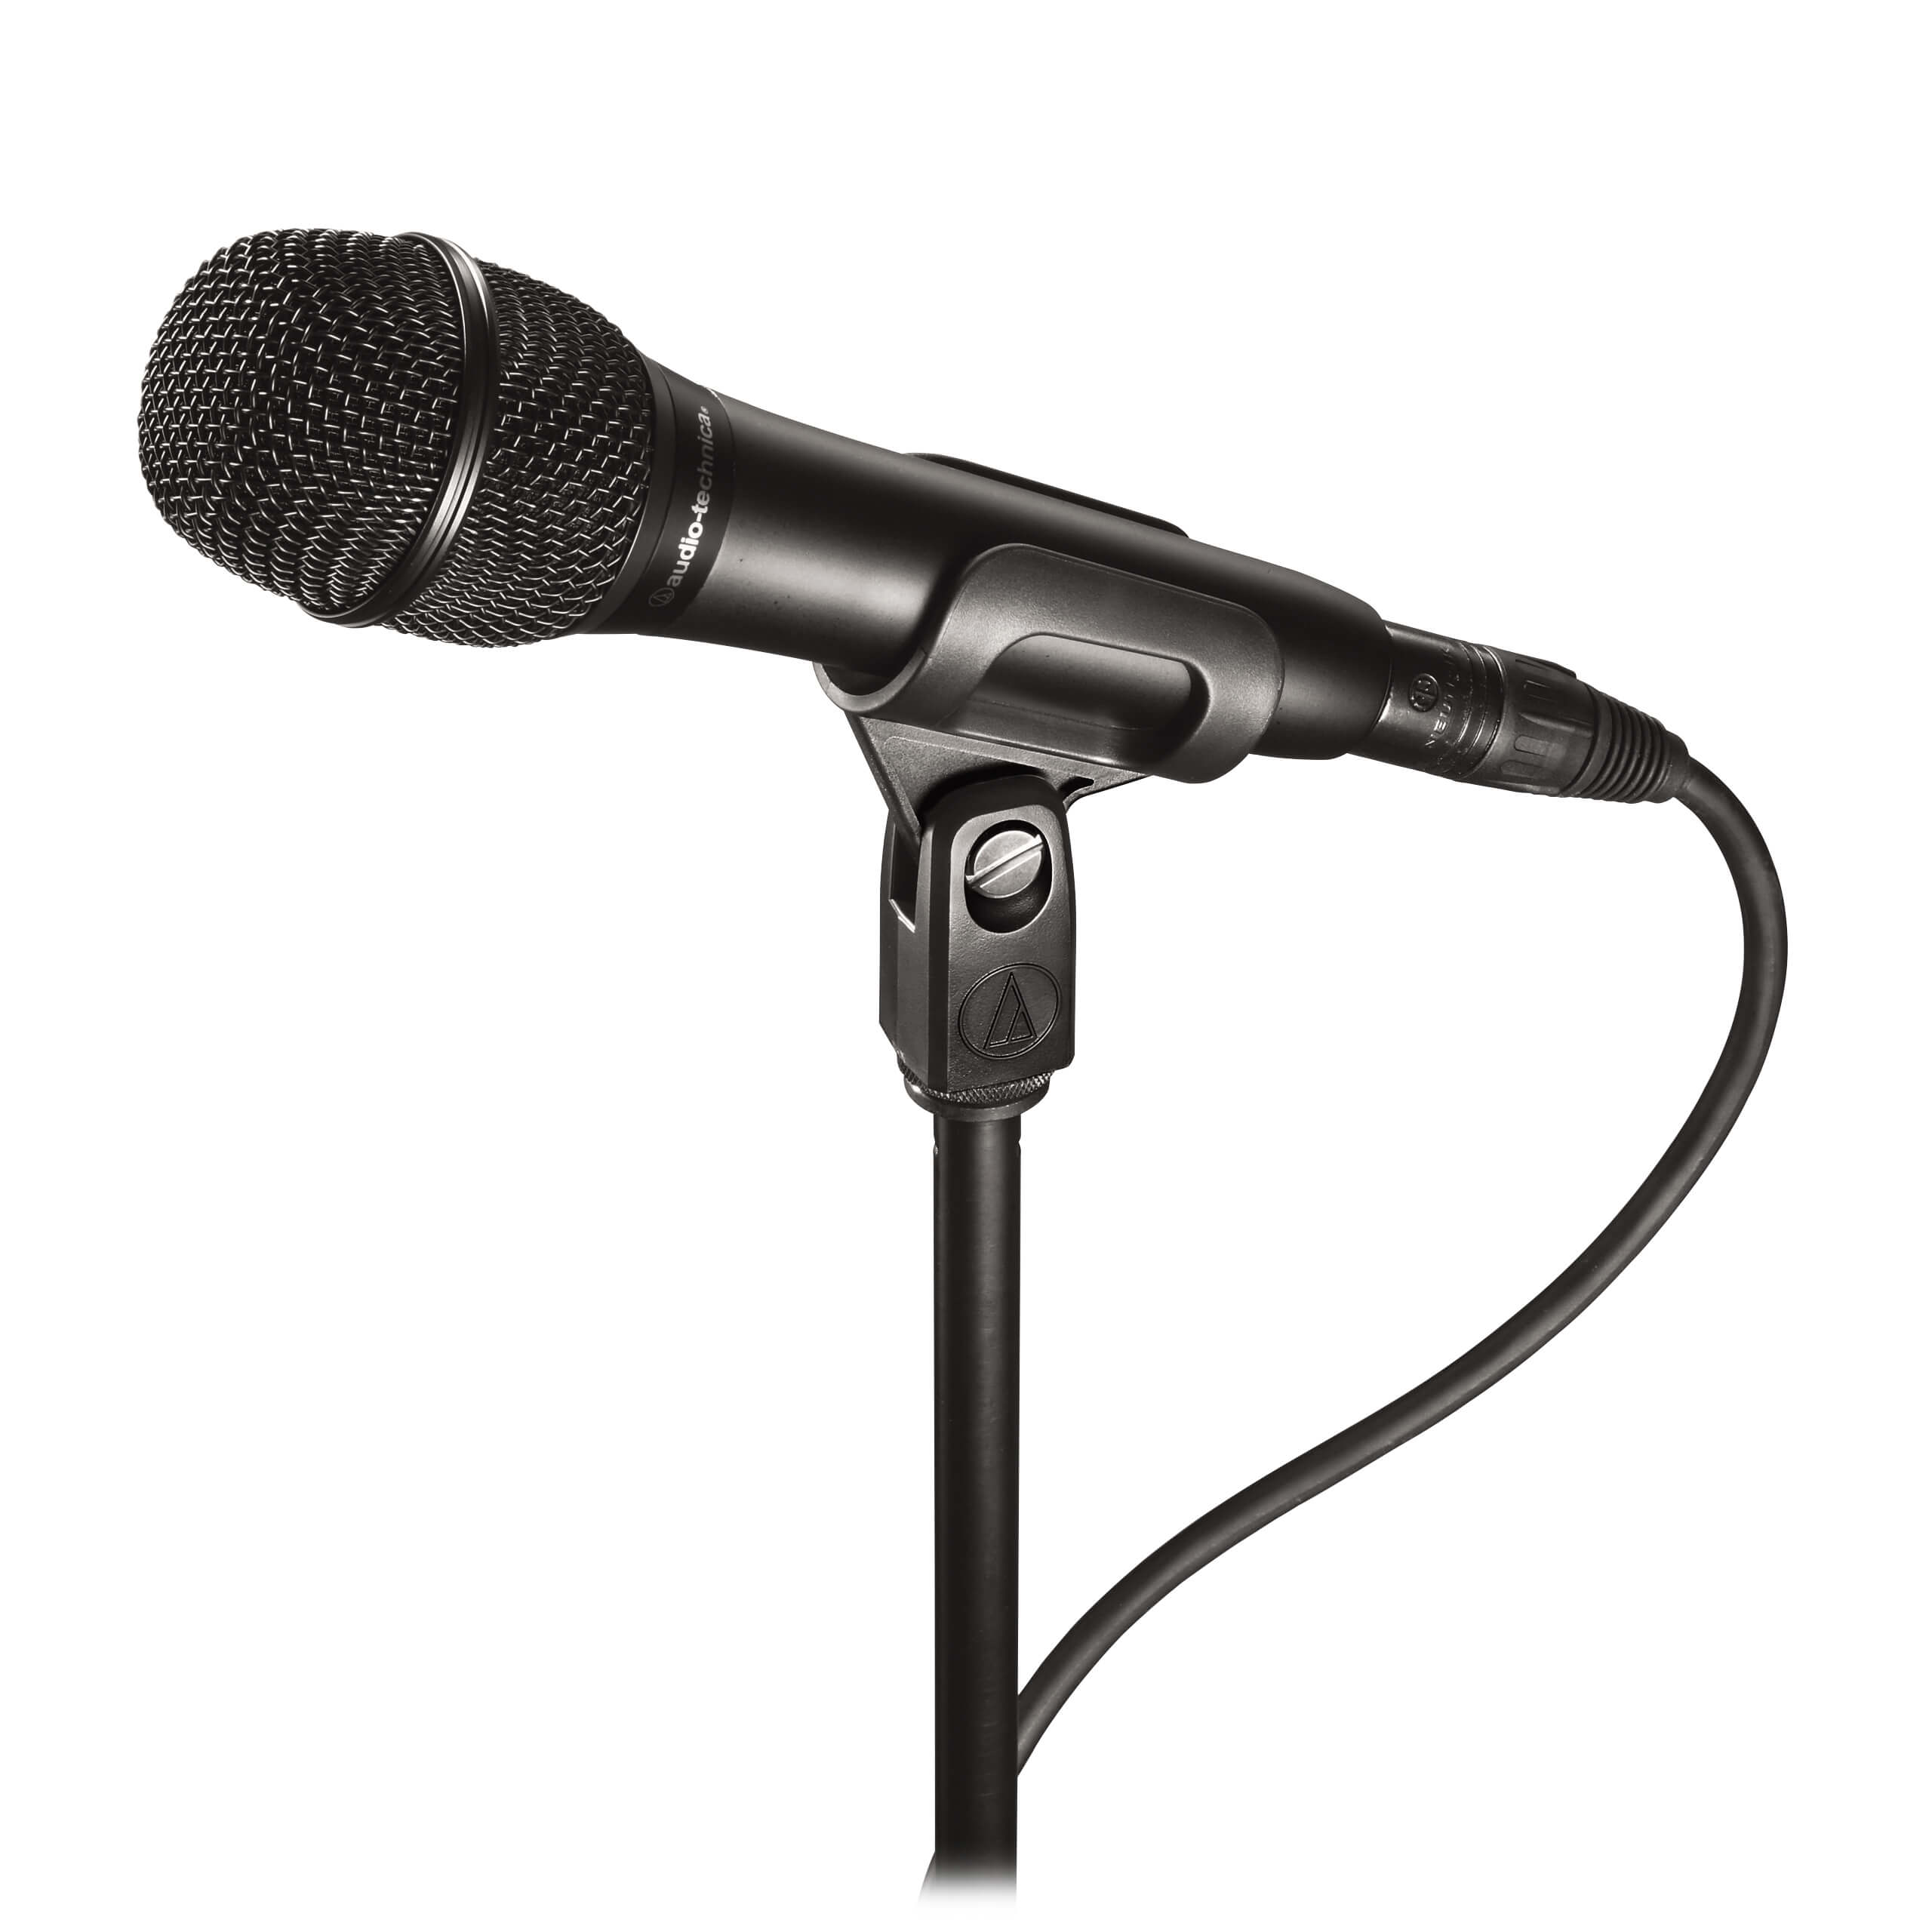 Winners announced in Audio-Technica AT2010 Condenser Microphone Giveaway!